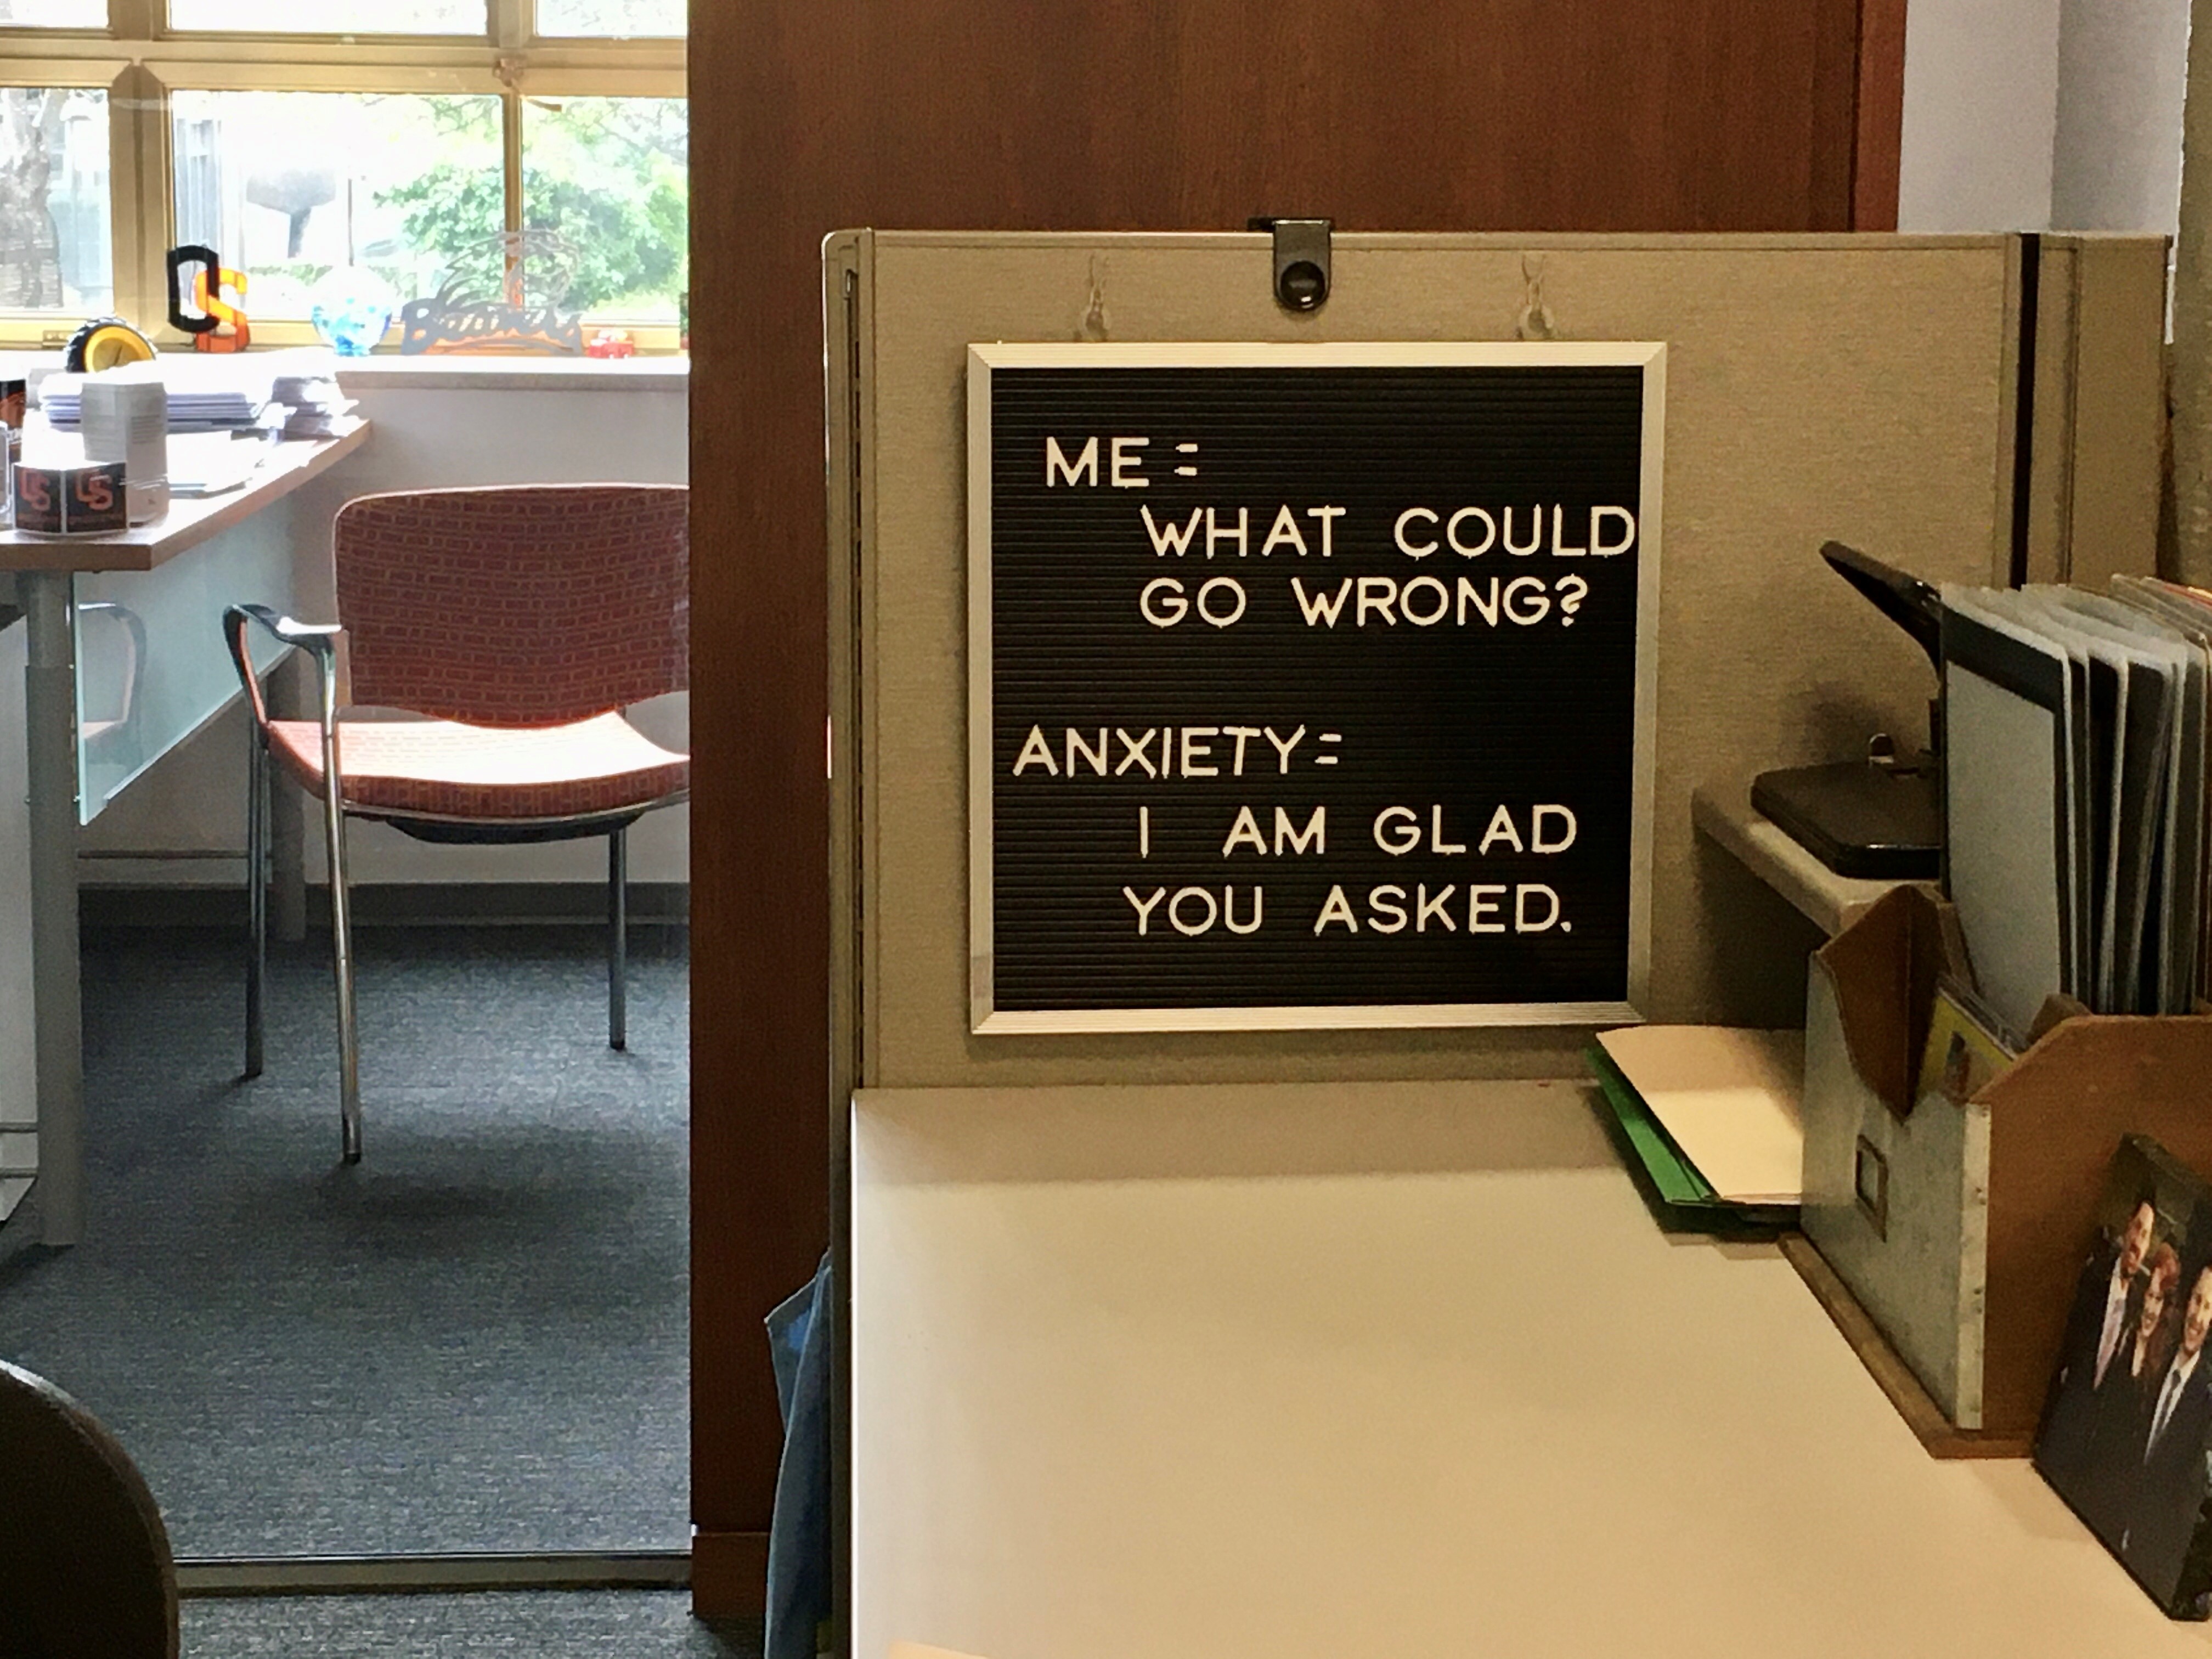 Photo of a letterboard in an office cubicle, reading "Me = What could go wrong? My anxiety = I'm glad you asked."